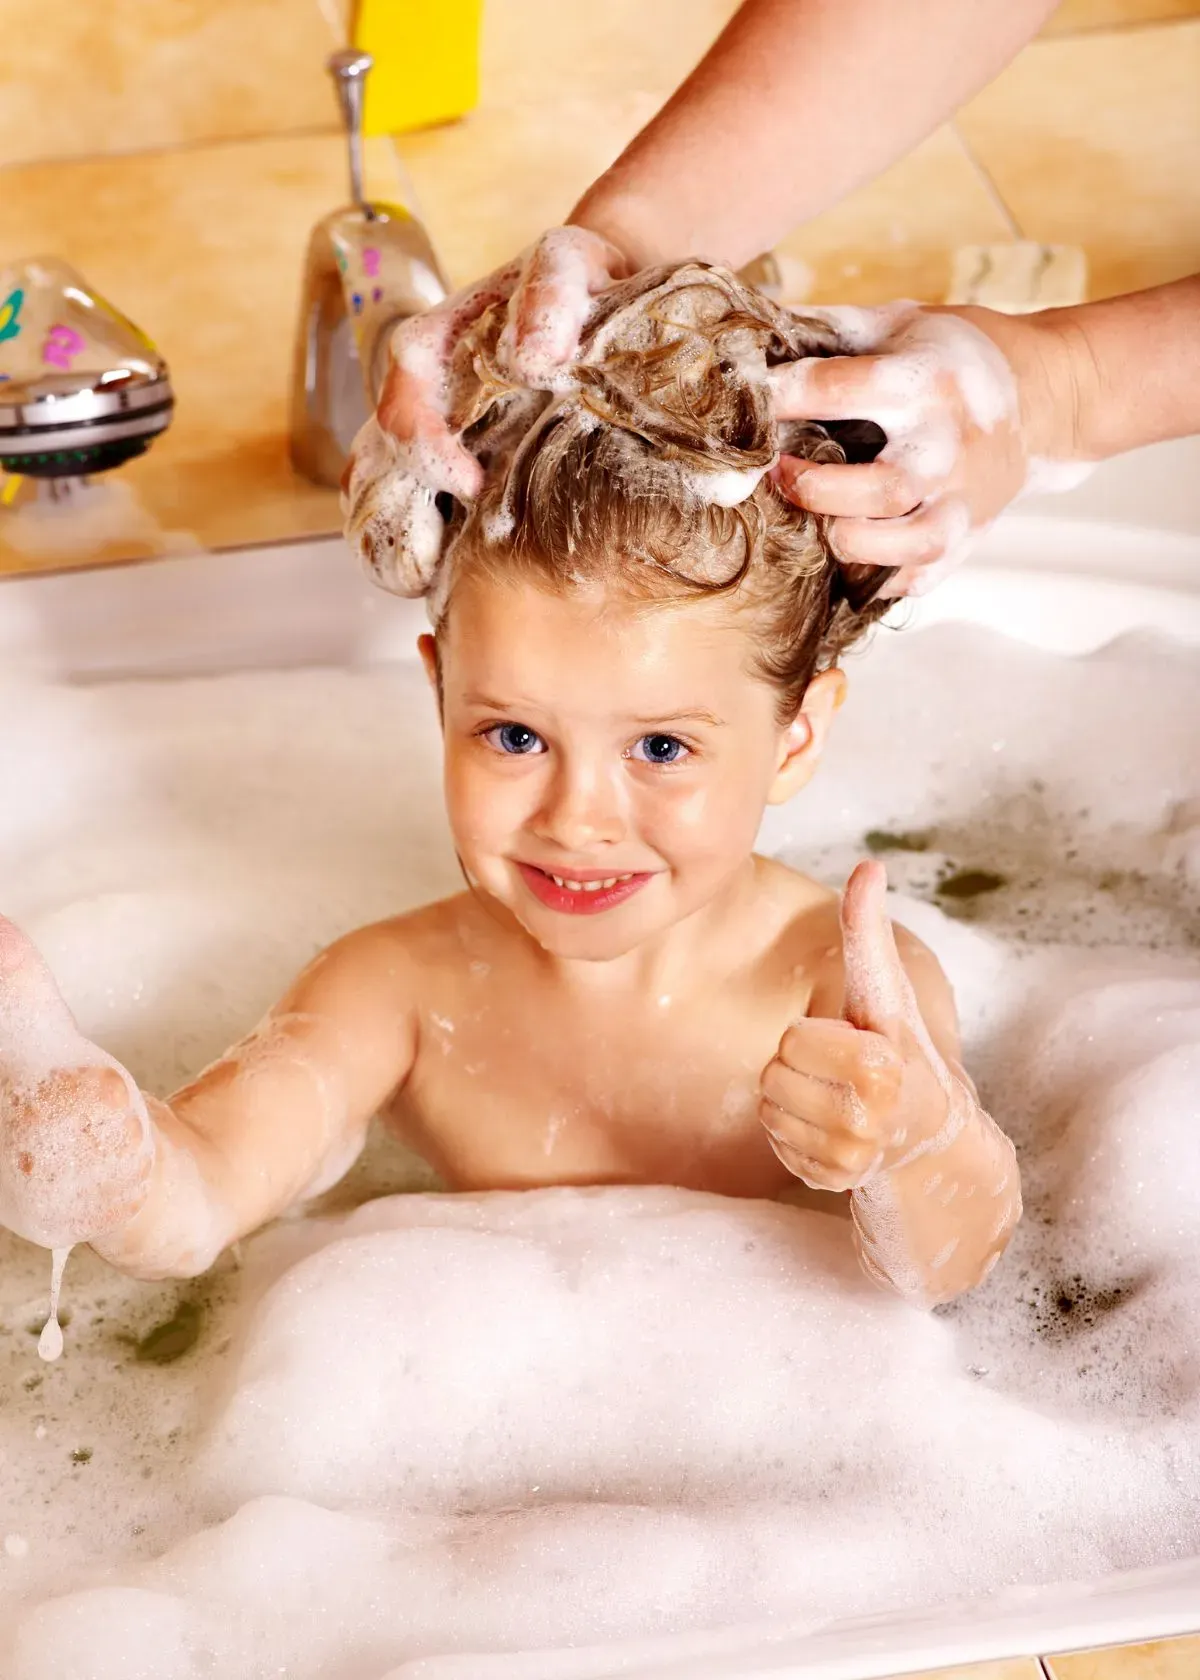 Kids' Shampoo: A Parents' Guide to Safe & Effective Choices